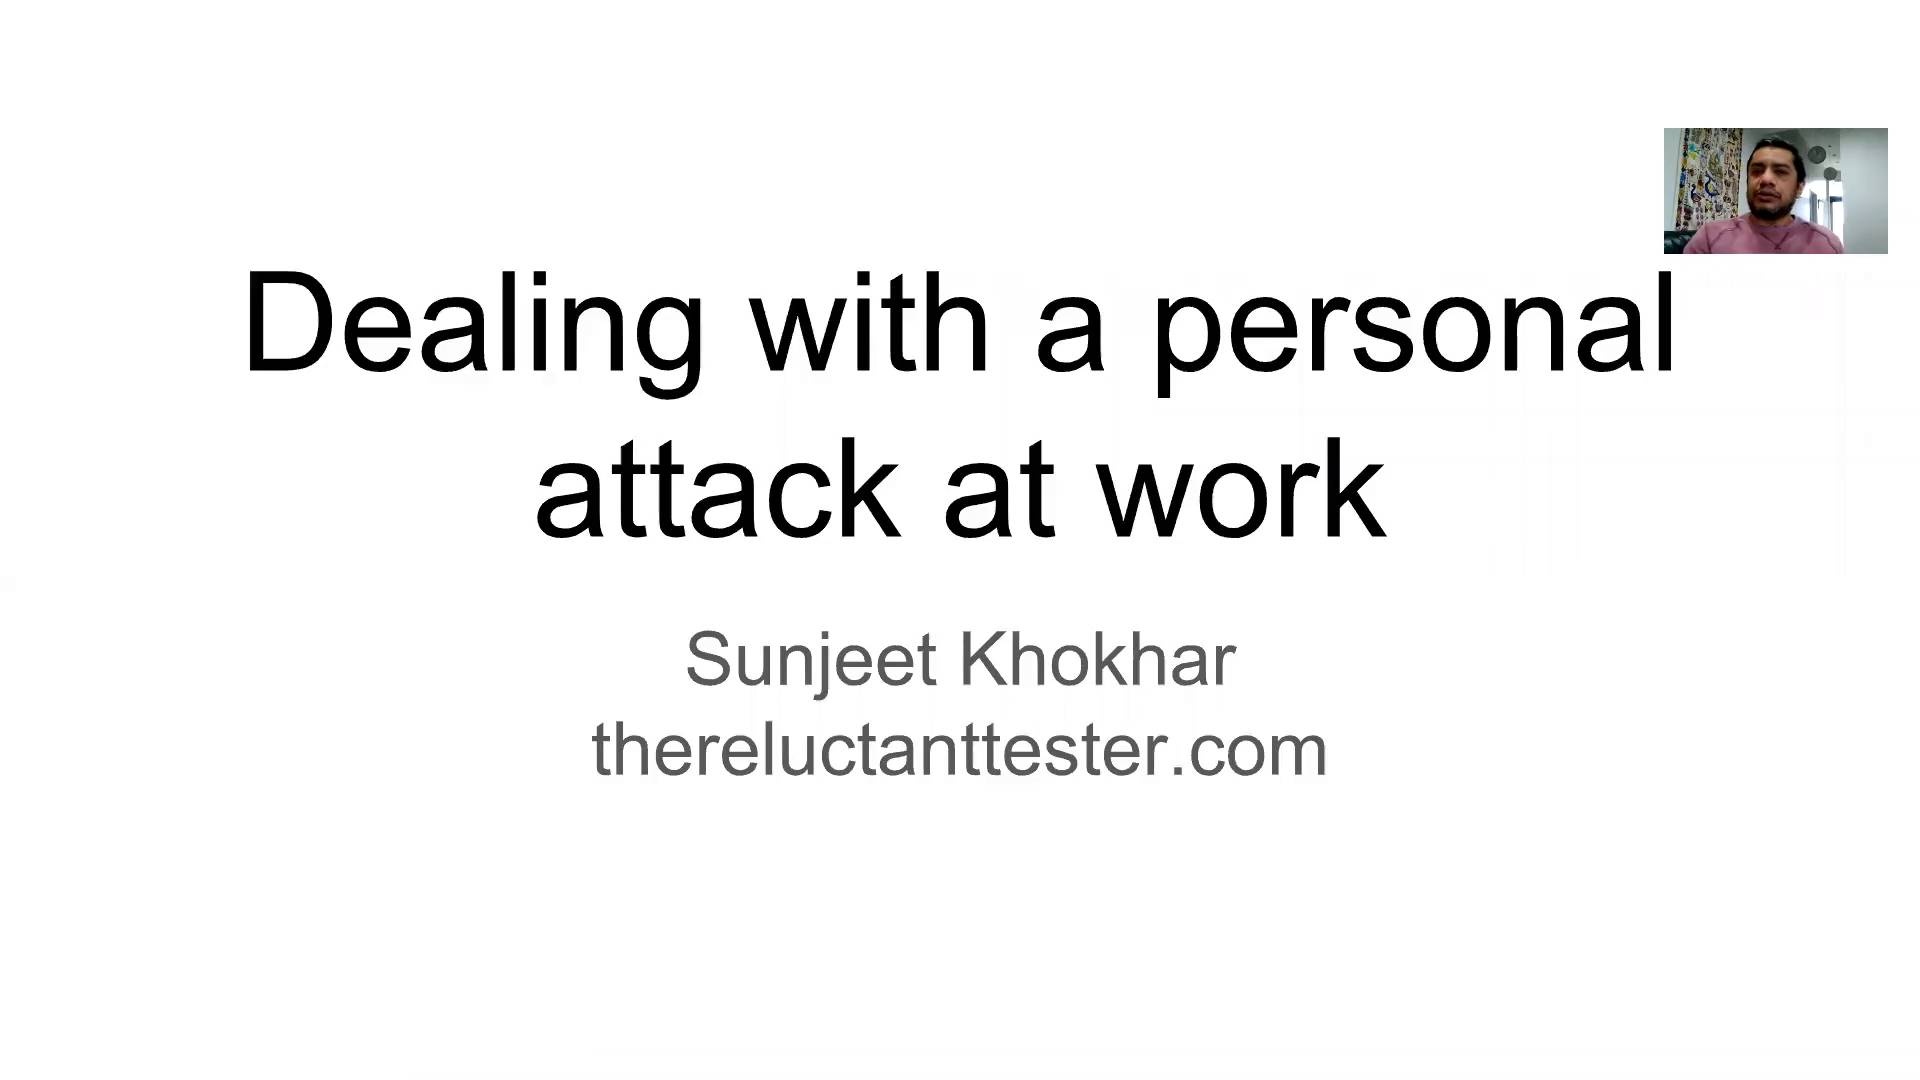 99 Second Talk - Sunjeet Khokhar - Dealing with a Personal Attack at Work